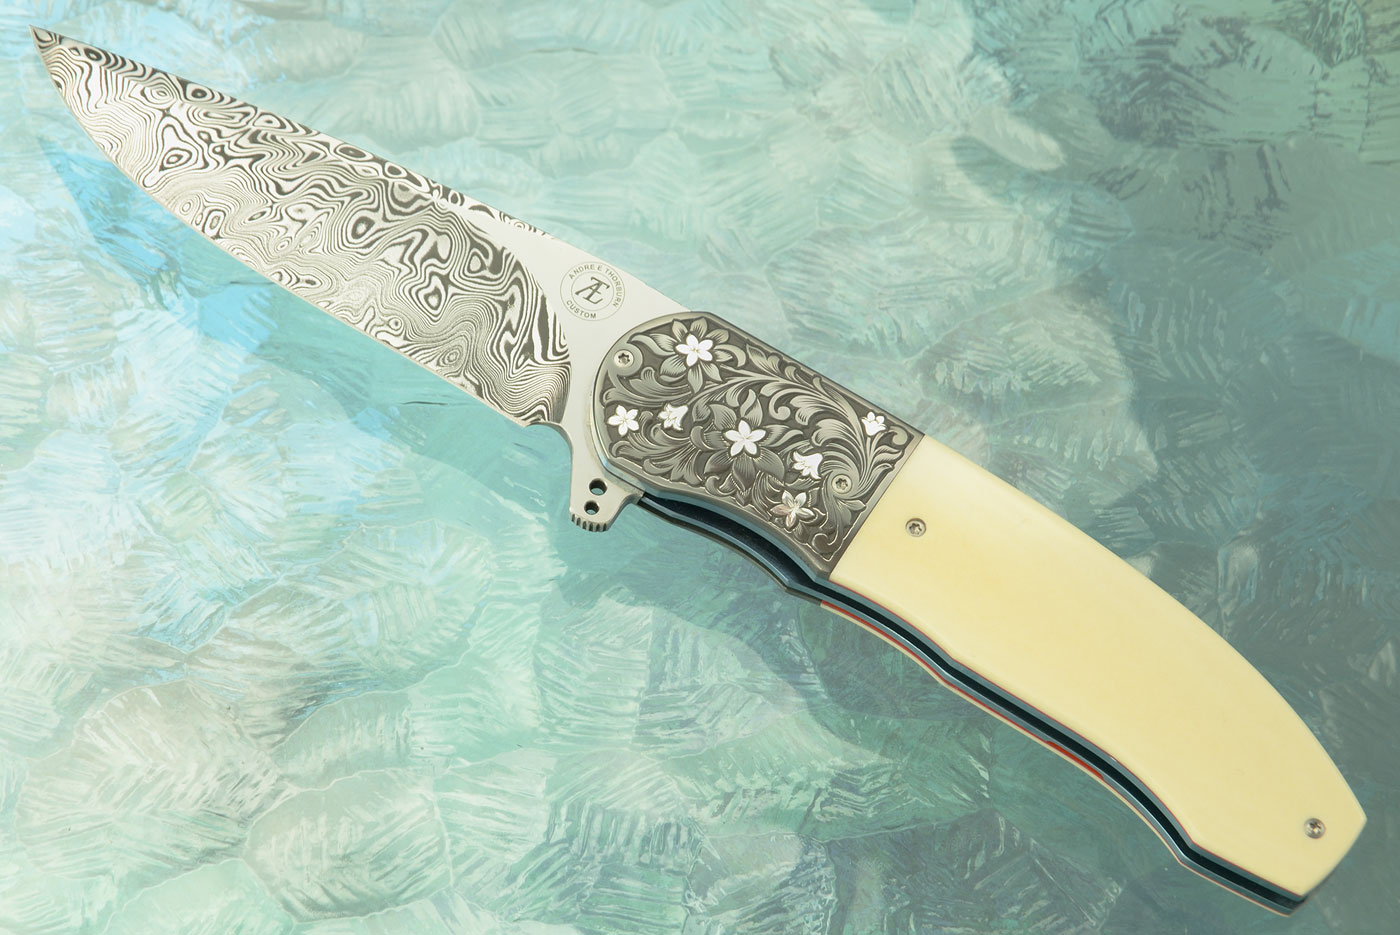 L48 Flipper with Antique Westinghouse Micarta, Damascus, and Engraved Zirconium with Silver Inlays (Ceramic IKBS)